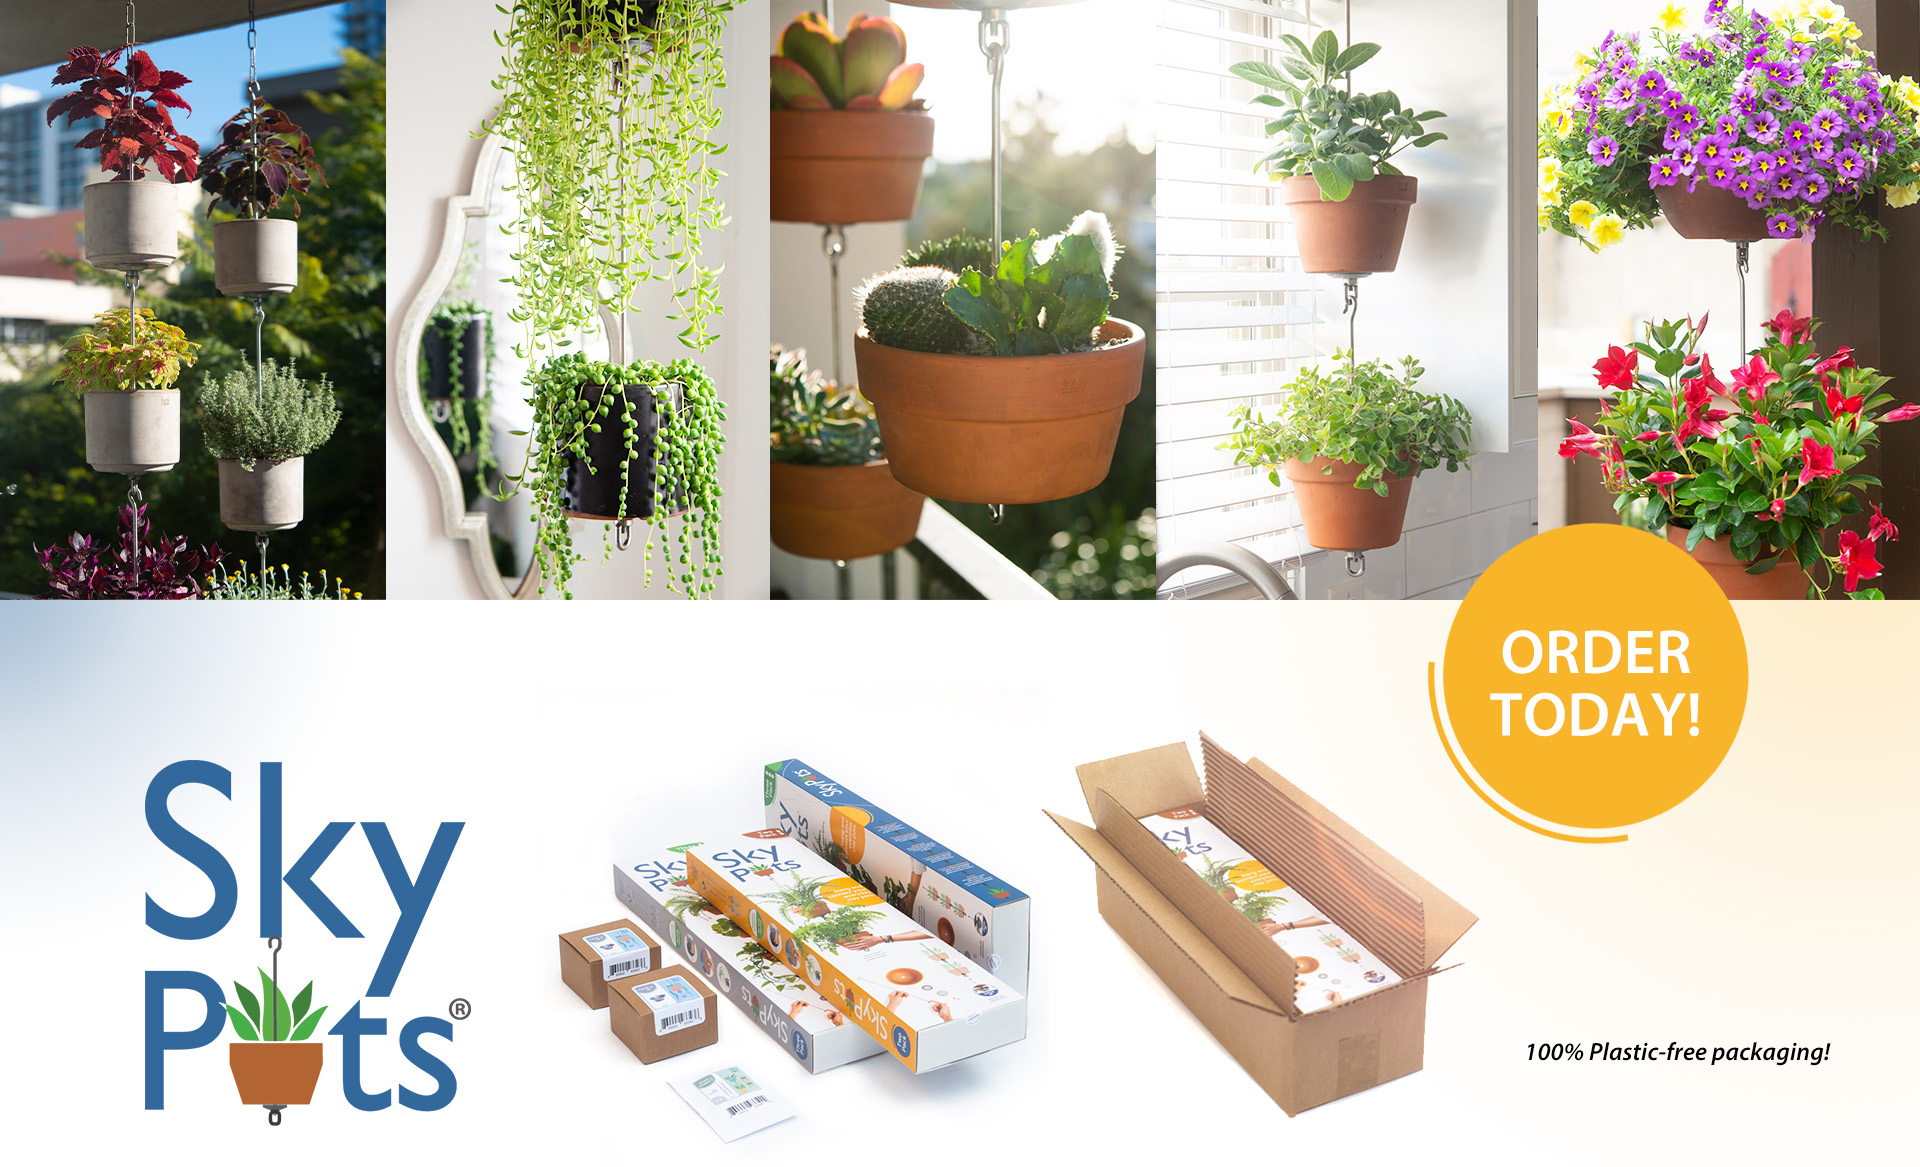 SkyPots arrangement collage with examples of product packaging. Order today! 100% Plastic free packaging.